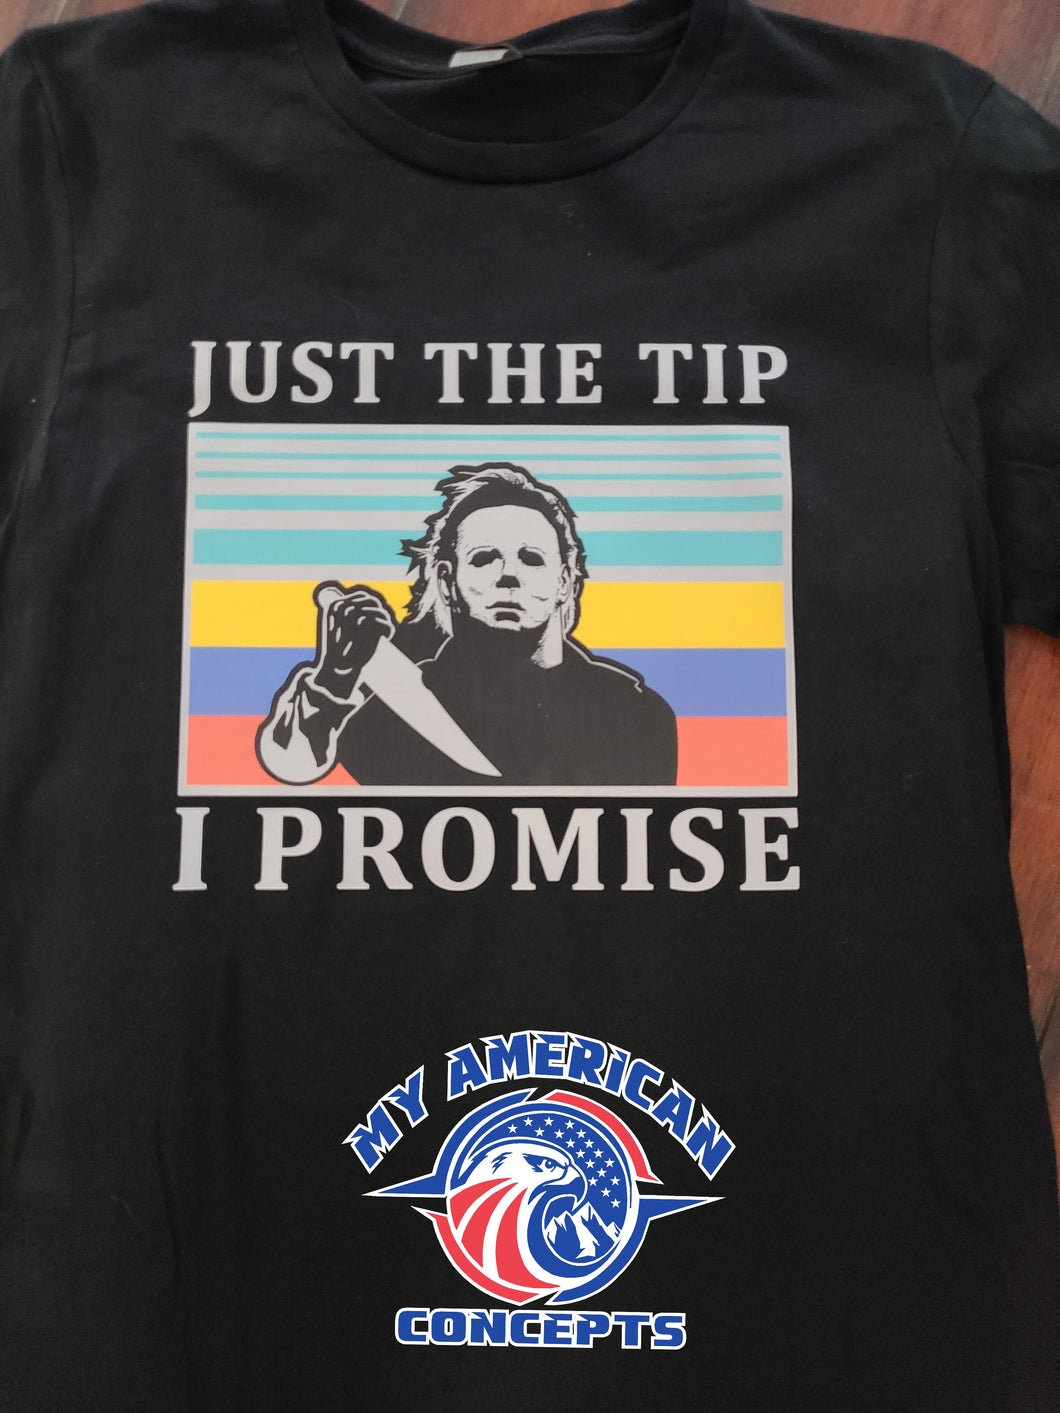 Just The Tip... Promise! Unisex t-shirt